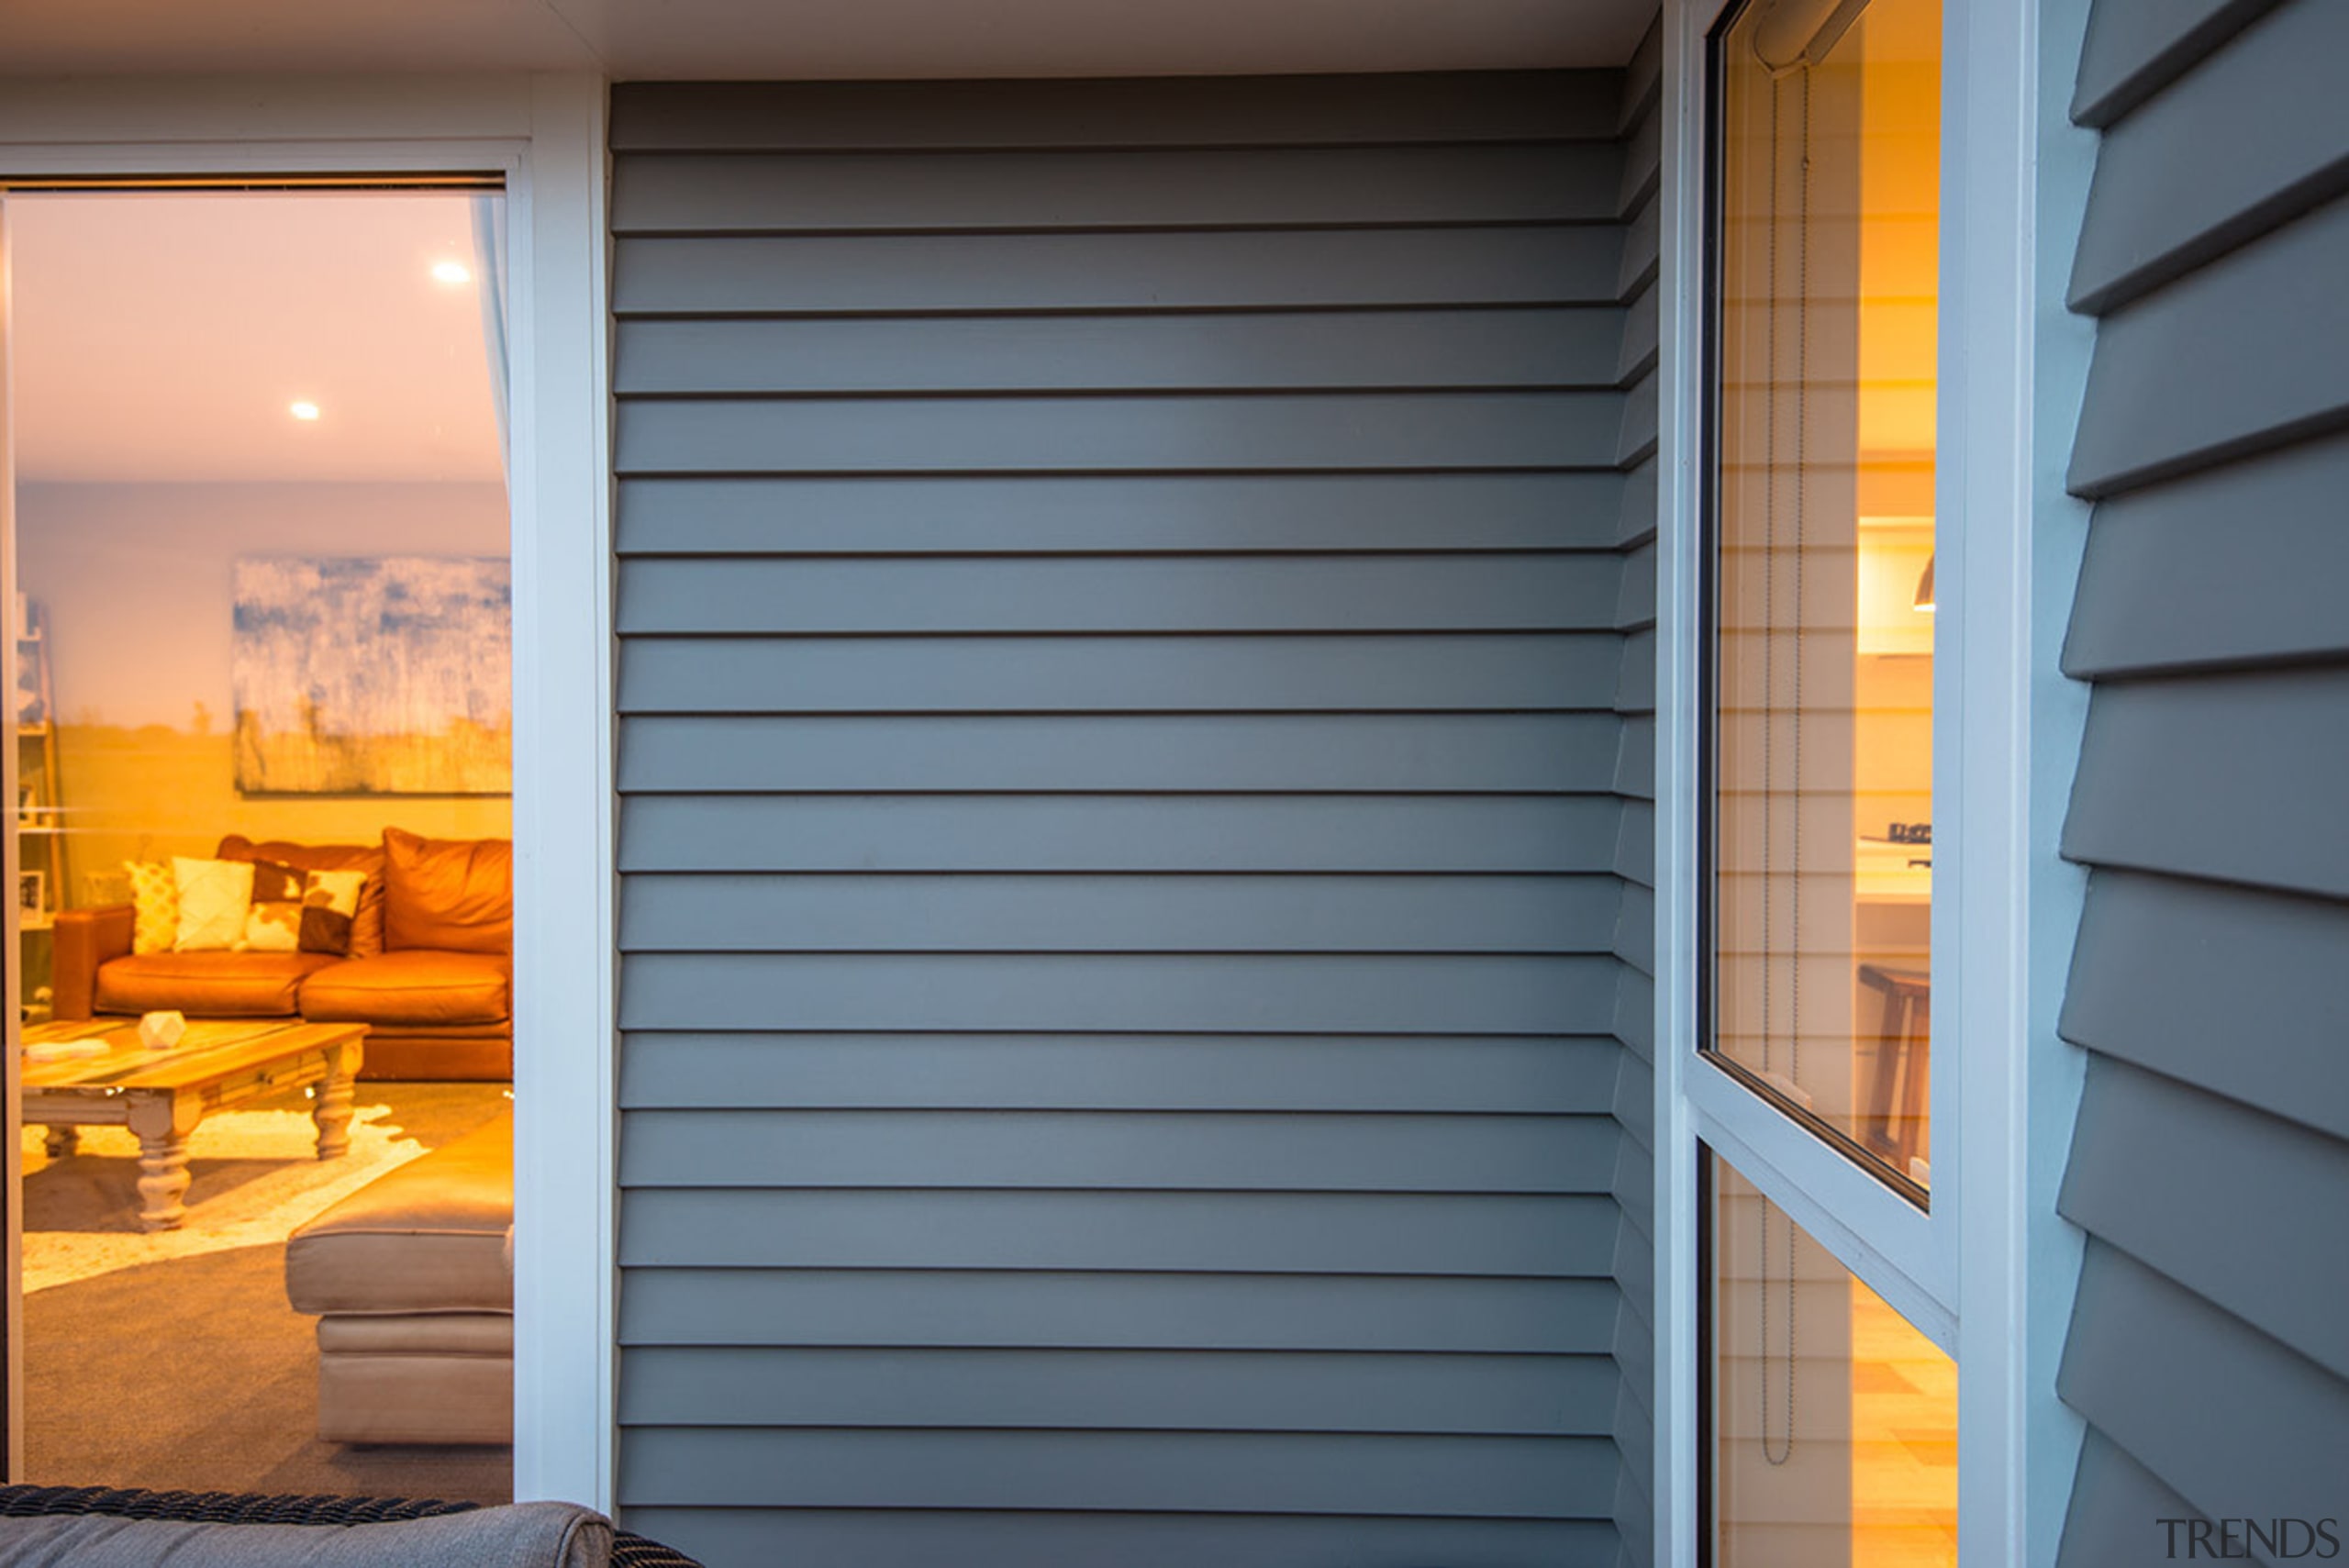 Envira’s Weatherboard System will provide a great finish door, facade, home, house, interior design, real estate, shade, siding, window, window blind, window covering, window treatment, wood, yellow, gray